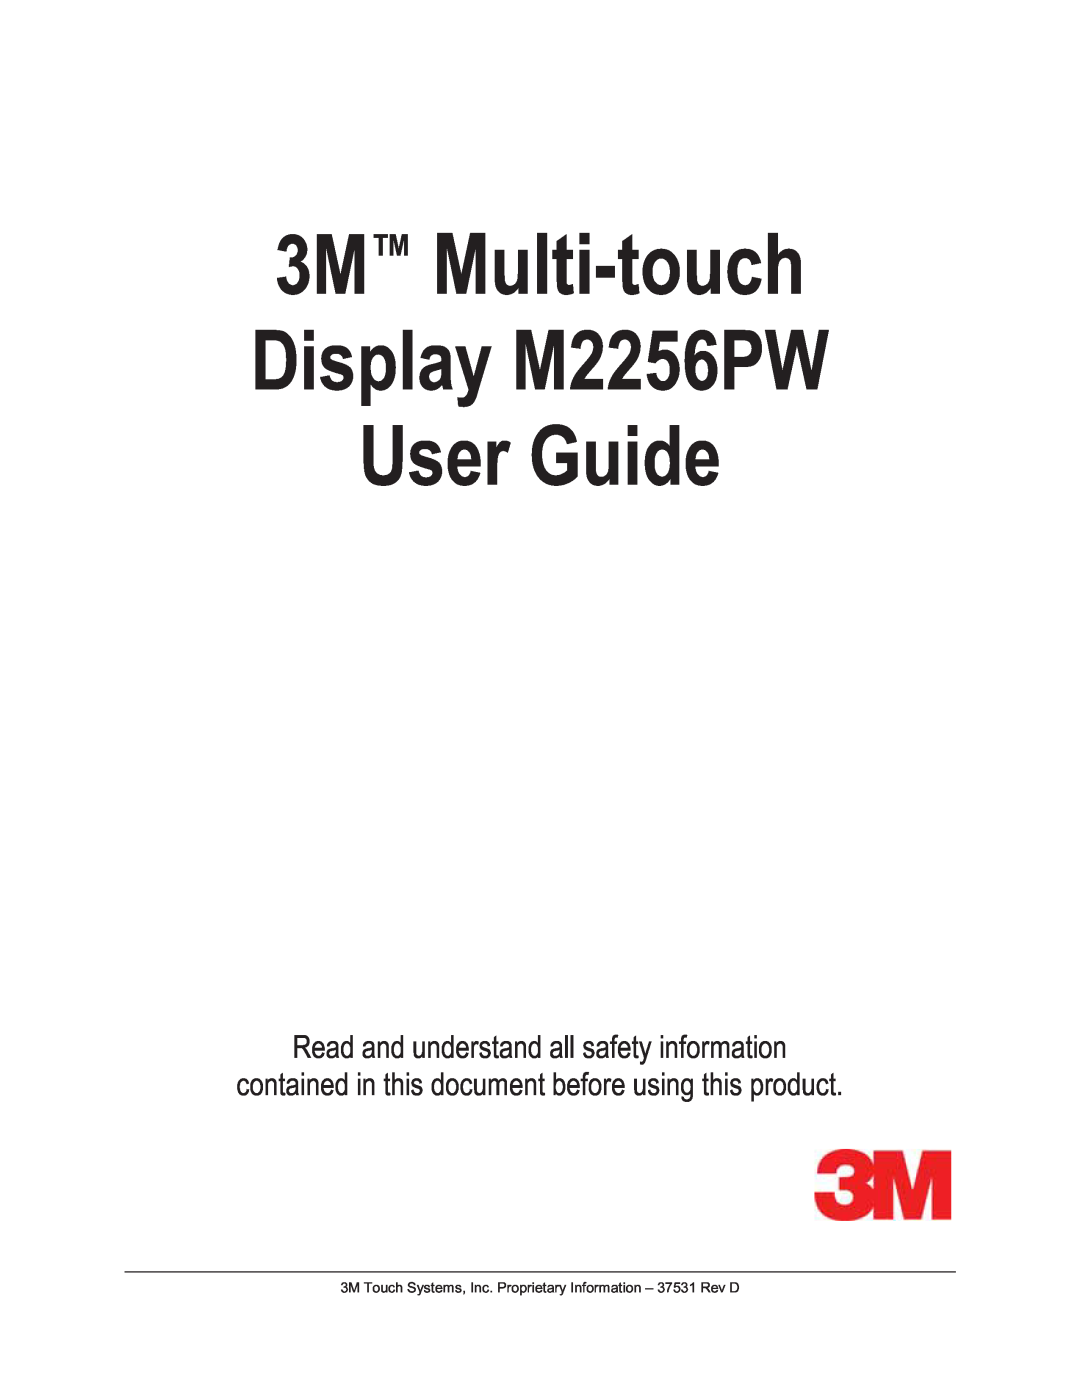 3M M2256PW manual 3M Touch Systems, Inc. Proprietary Information - 37531 Rev D 